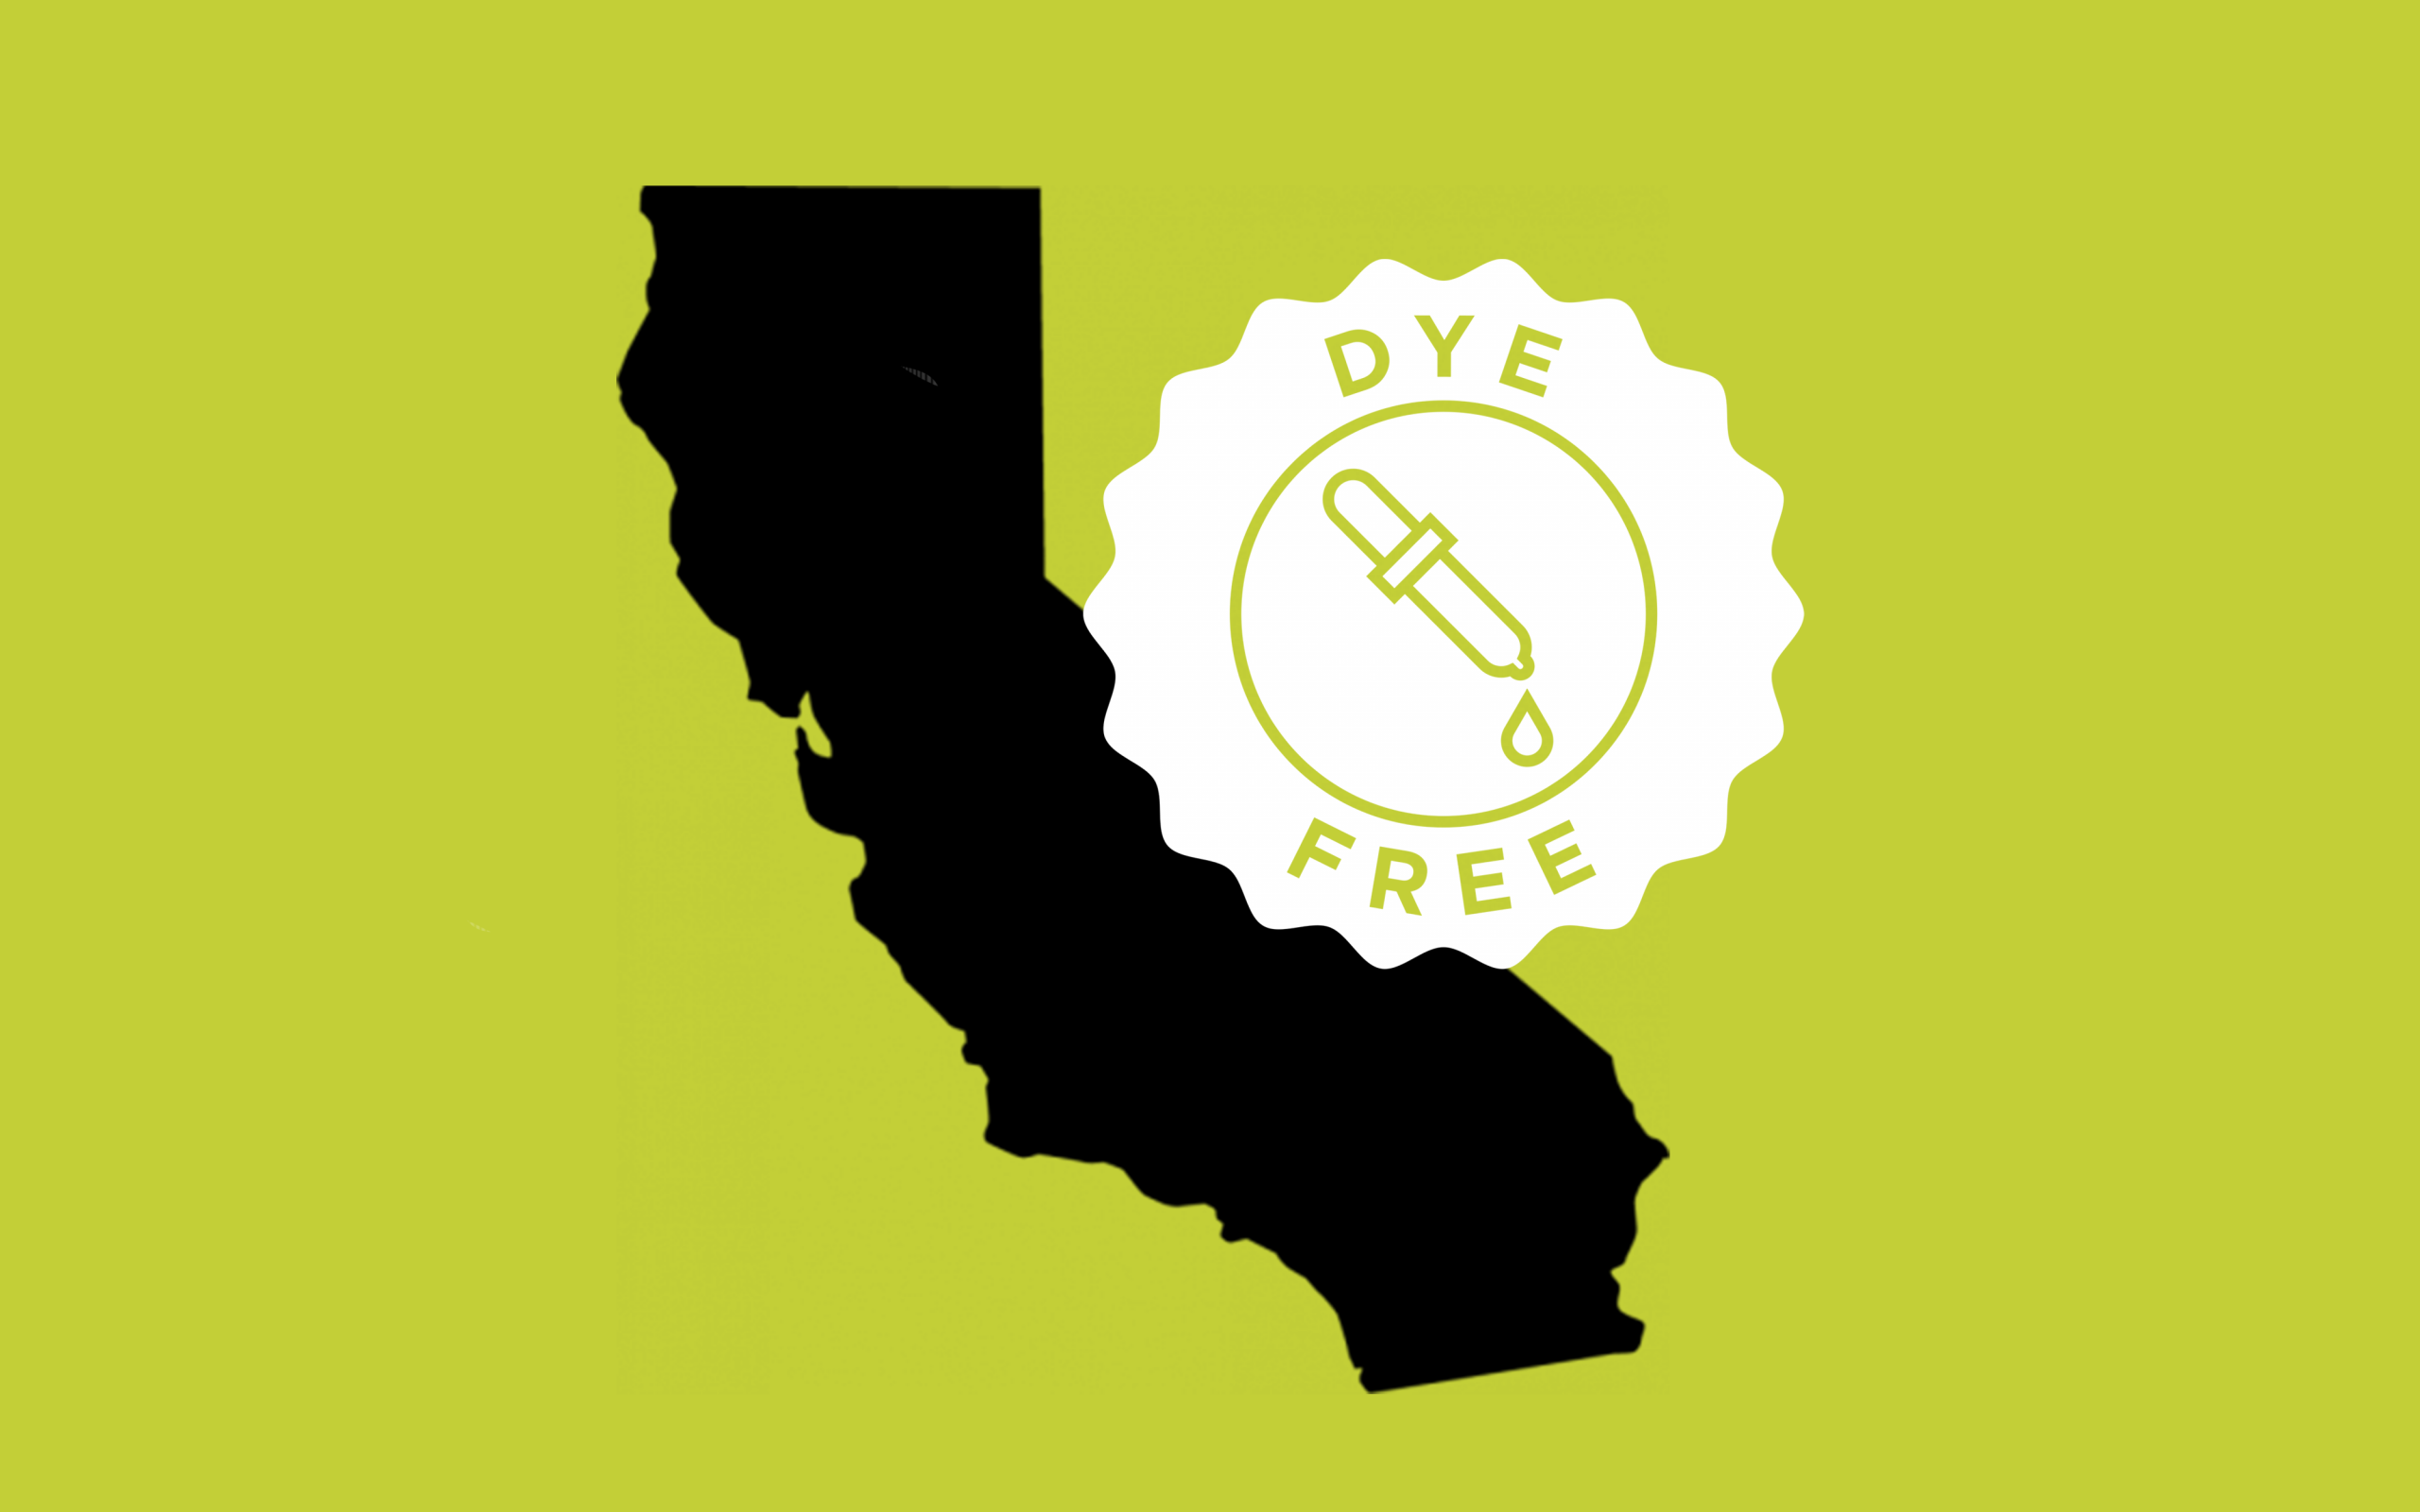 graphic of california with a dye-free badge